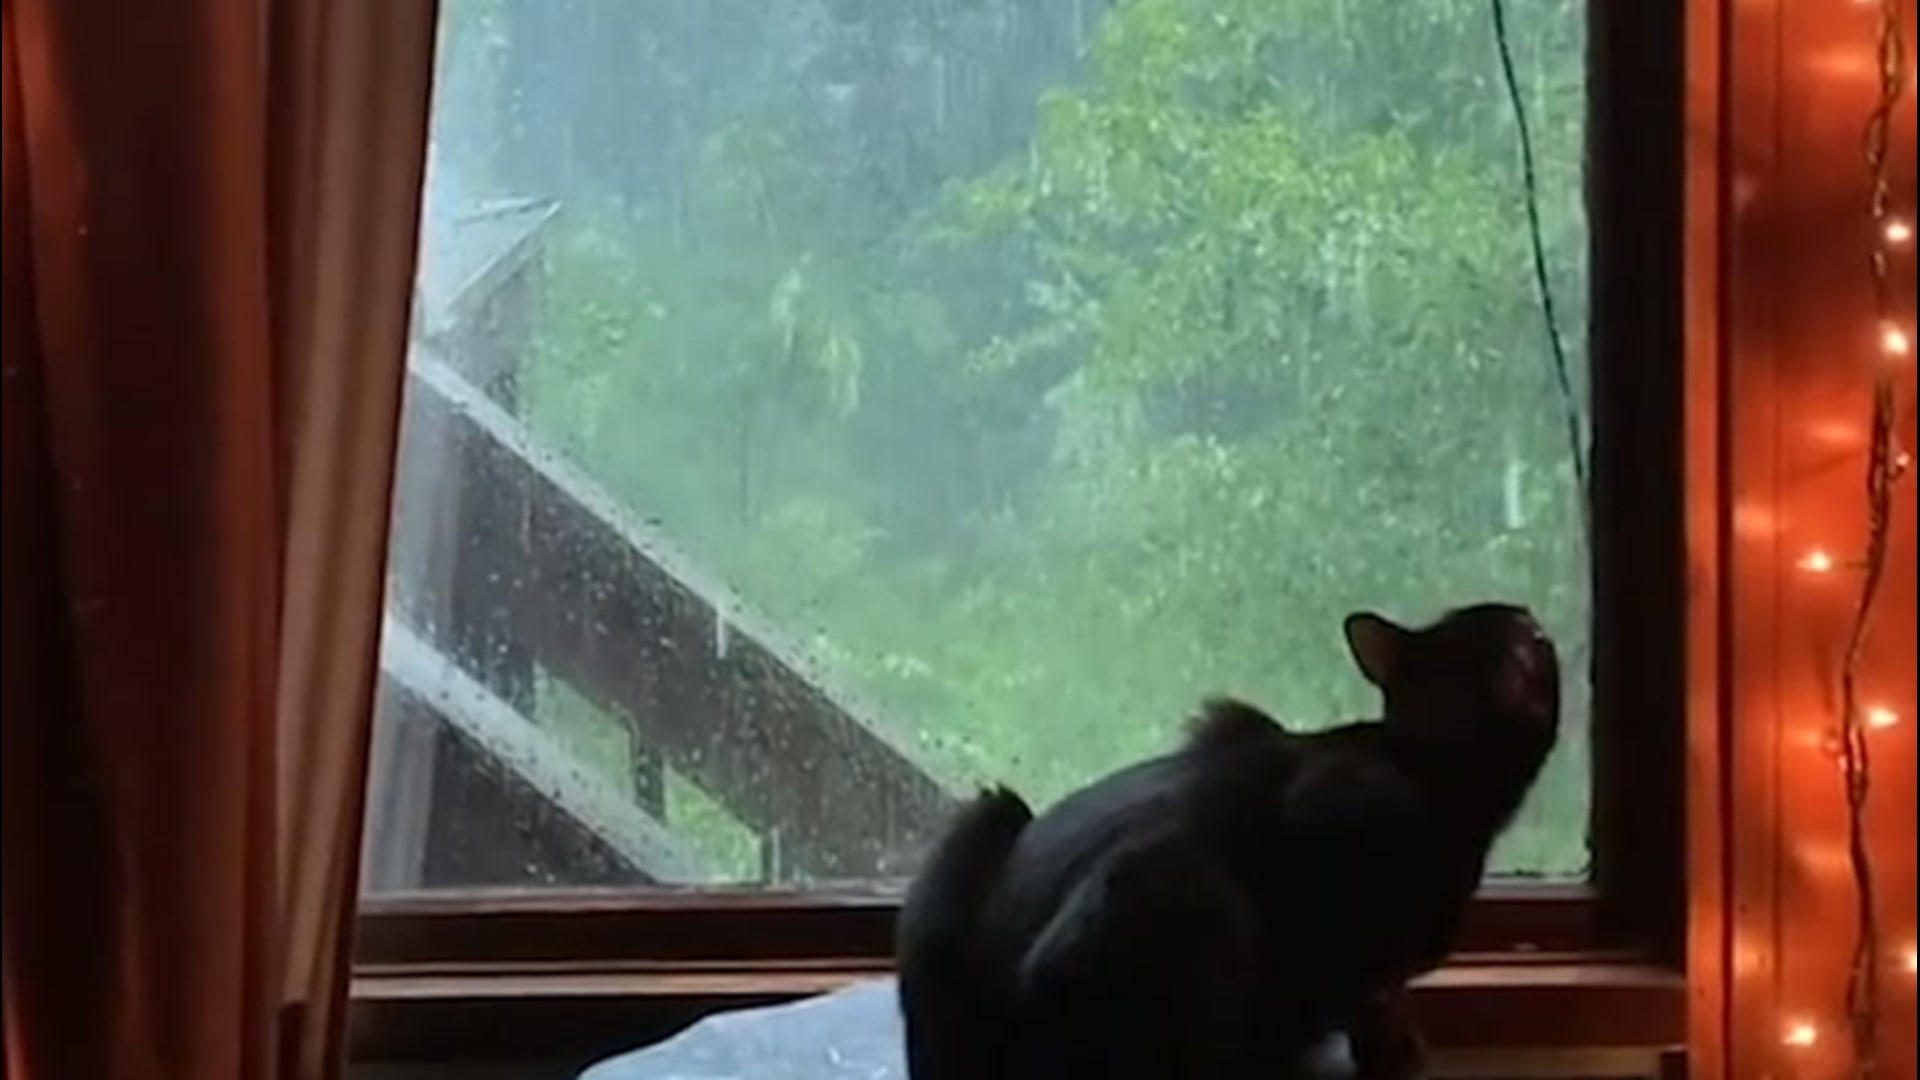 One cat in Birmingham, Alabama, stared out the window on July 12, simply watching as rain drenched the window and thunder roared in the background.